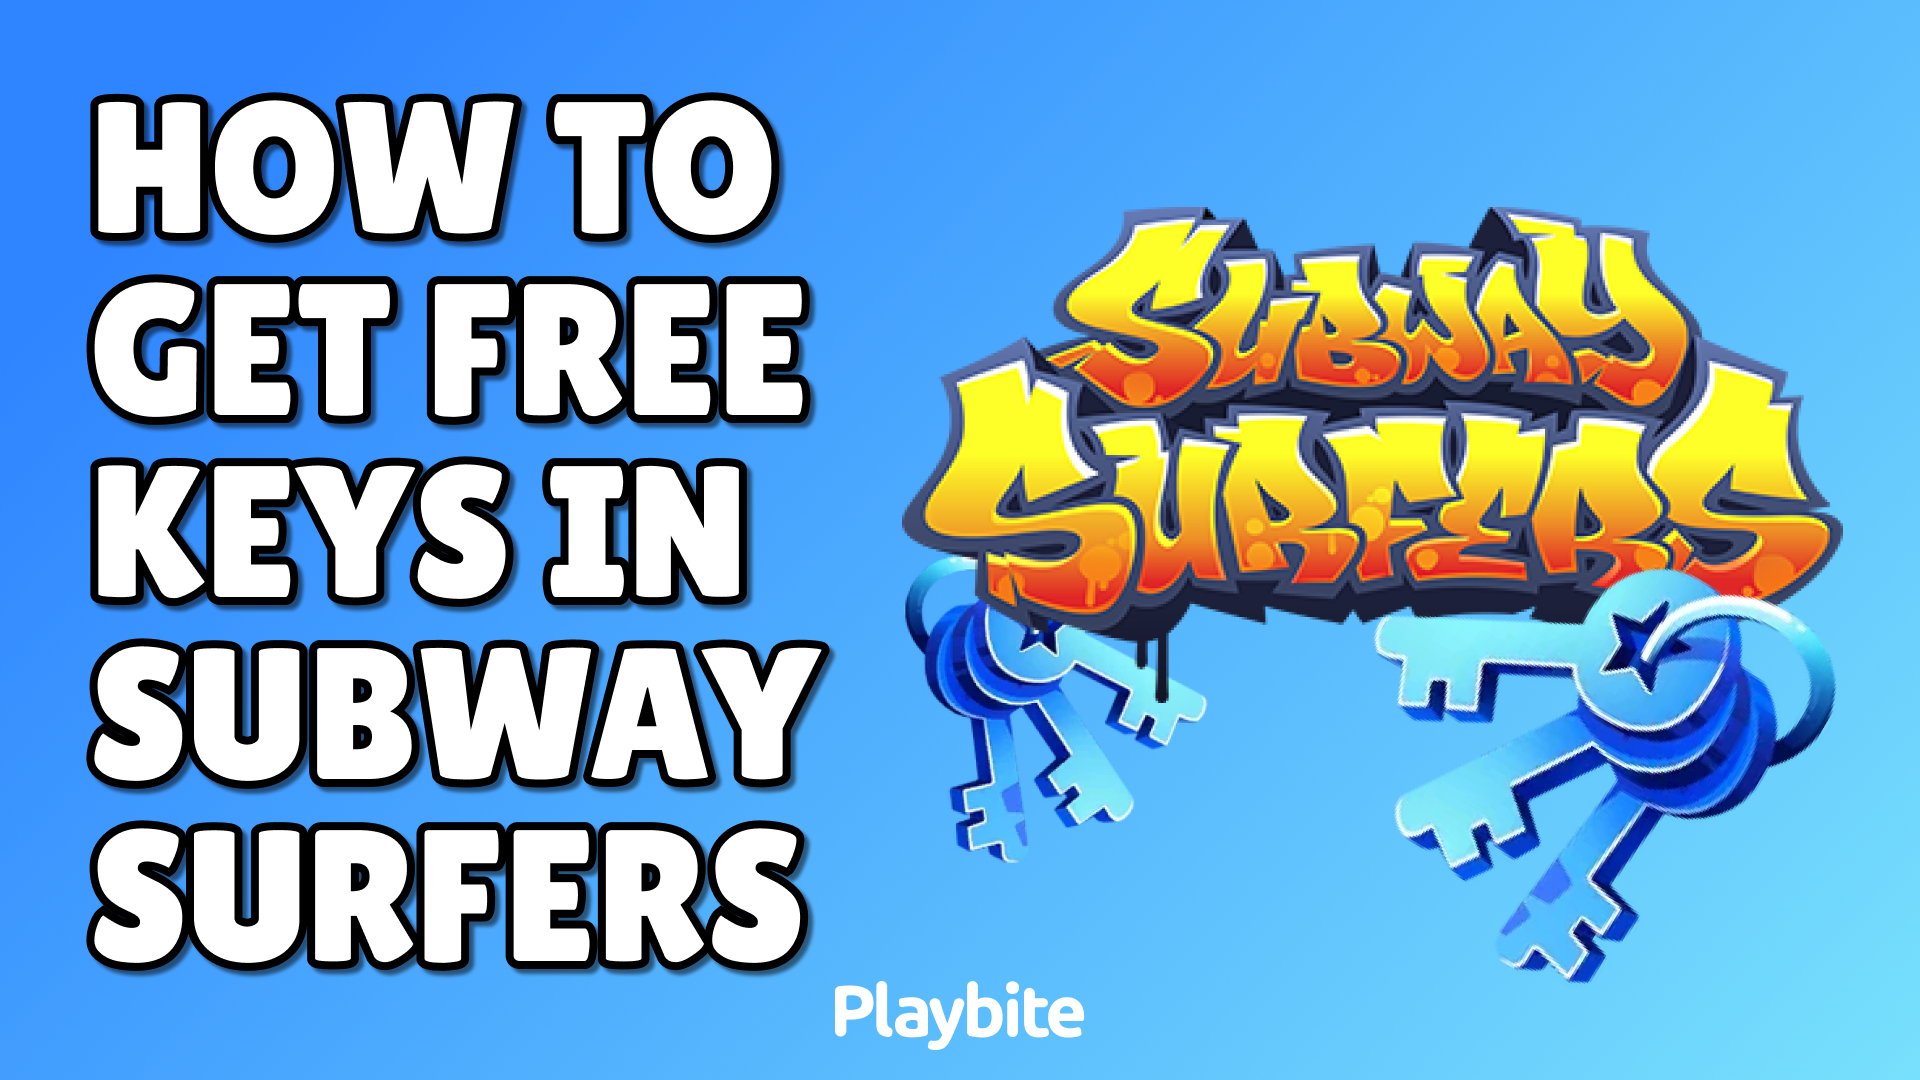 How To Get Free Keys In Subway Surfers